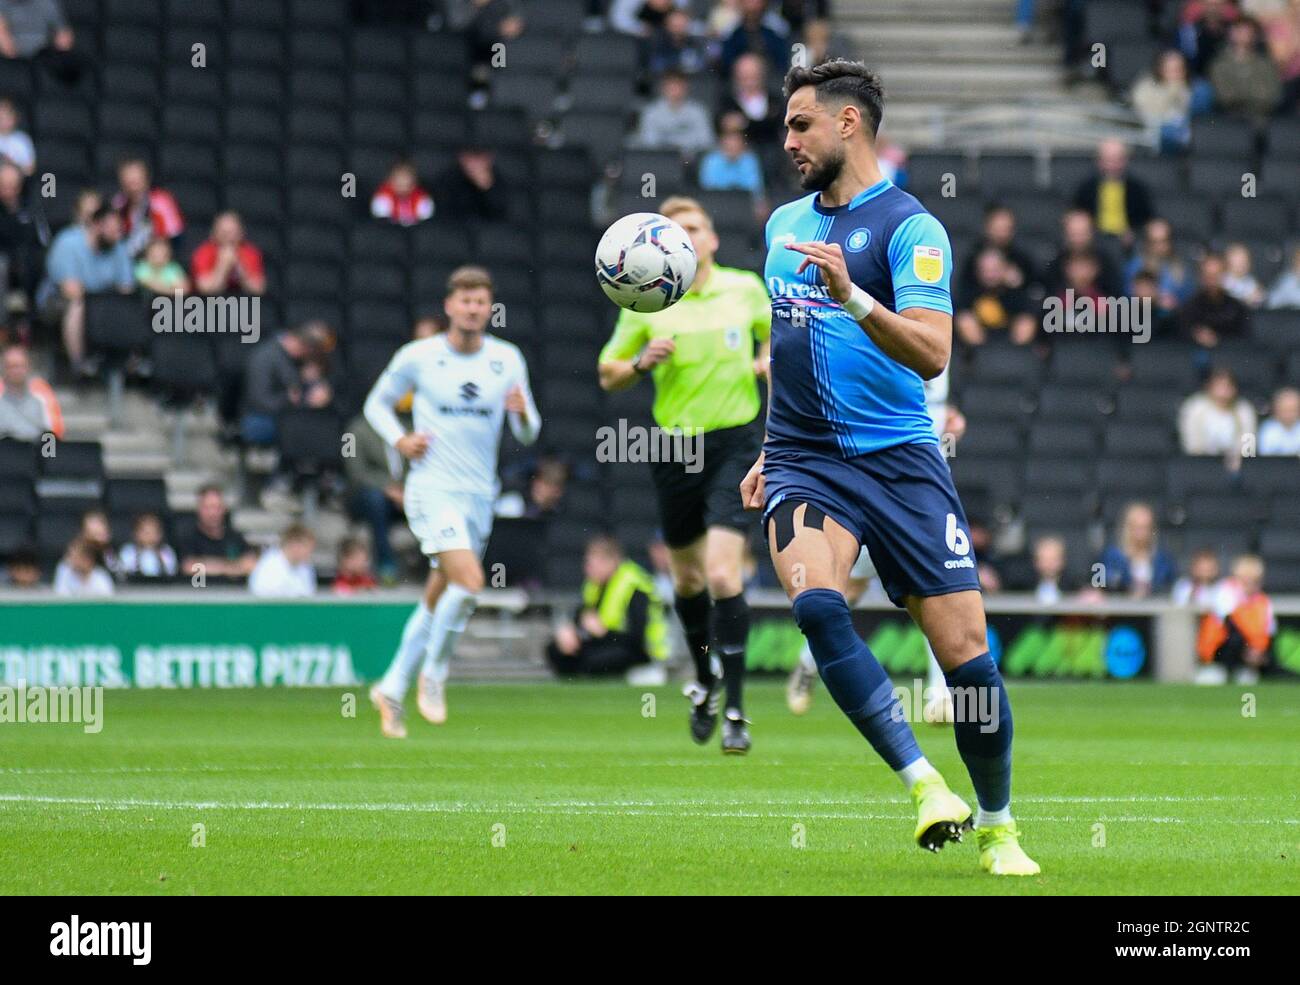 MILTON KEYNES, ENGLAND - SEPTEMBER 25, 2021: Ryan Sirous Tafazolli of Wycombe pictured during the 2021/22 SkyBet EFL League One matchweek 9 game between MK Dons FC and Wycombe Wanderers FC at Stadium MK. Copyright: Cosmin Iftode/Picstaff Stock Photo